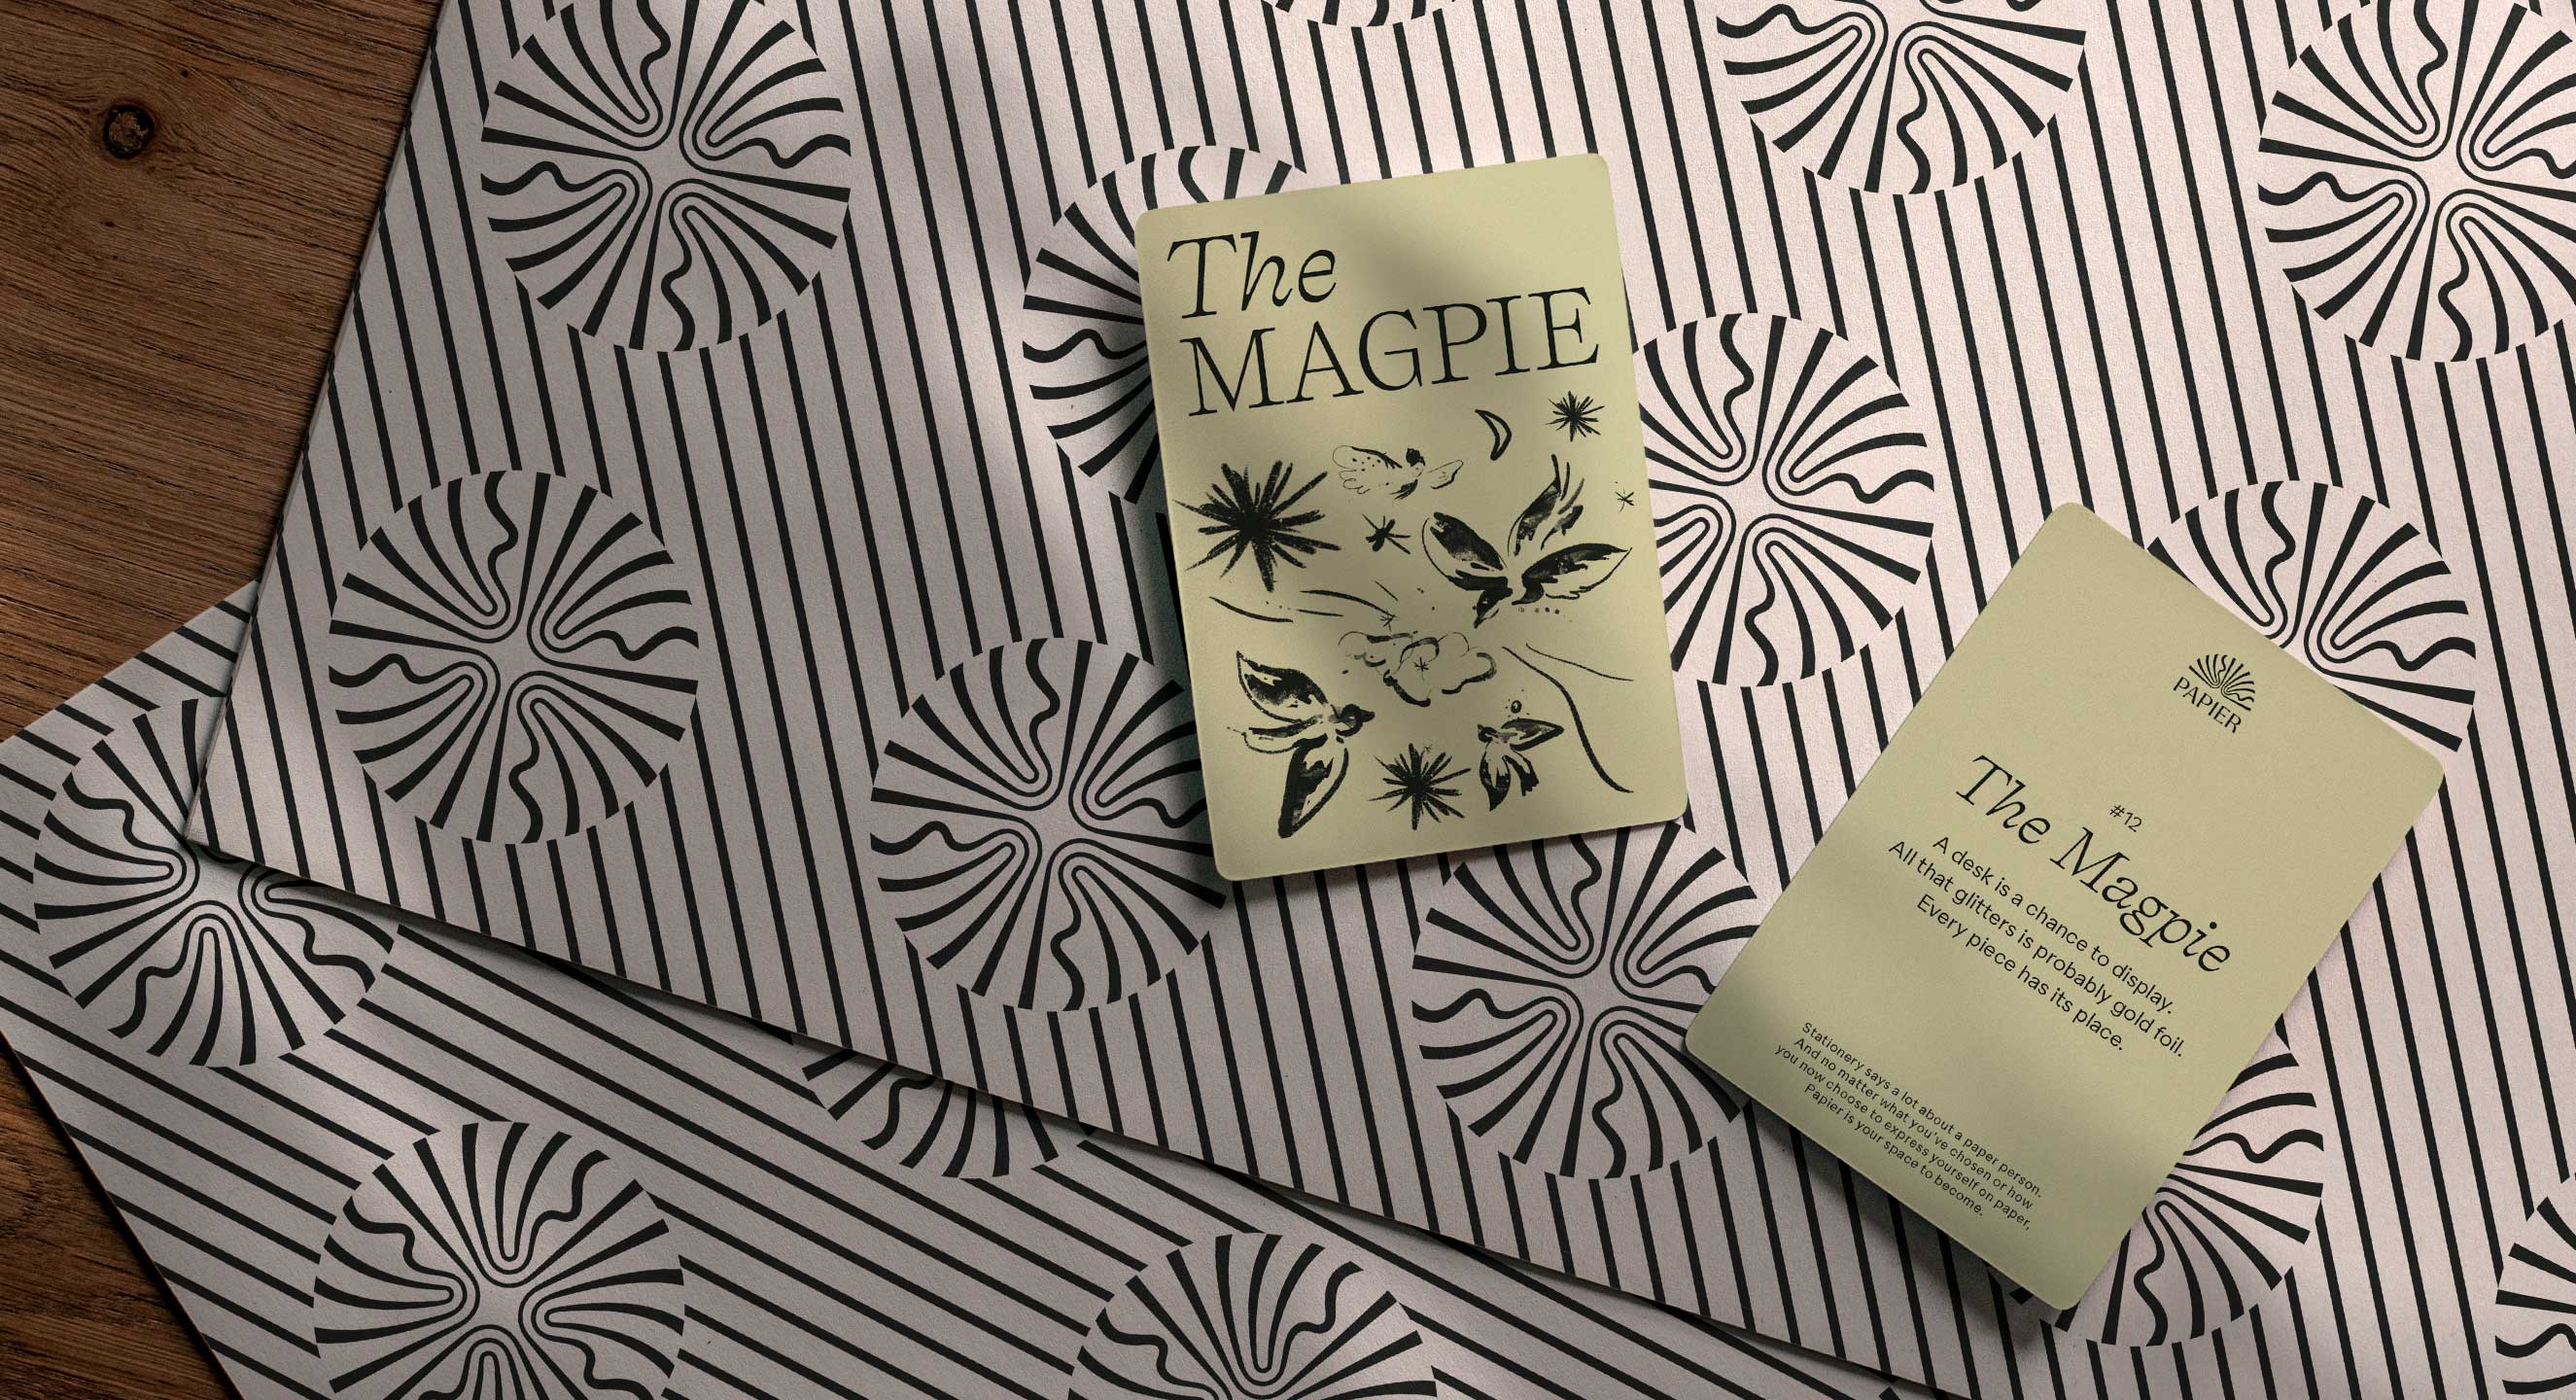 Ragged Edge rebrands Papier: from stationery purchase to pages of  possibility